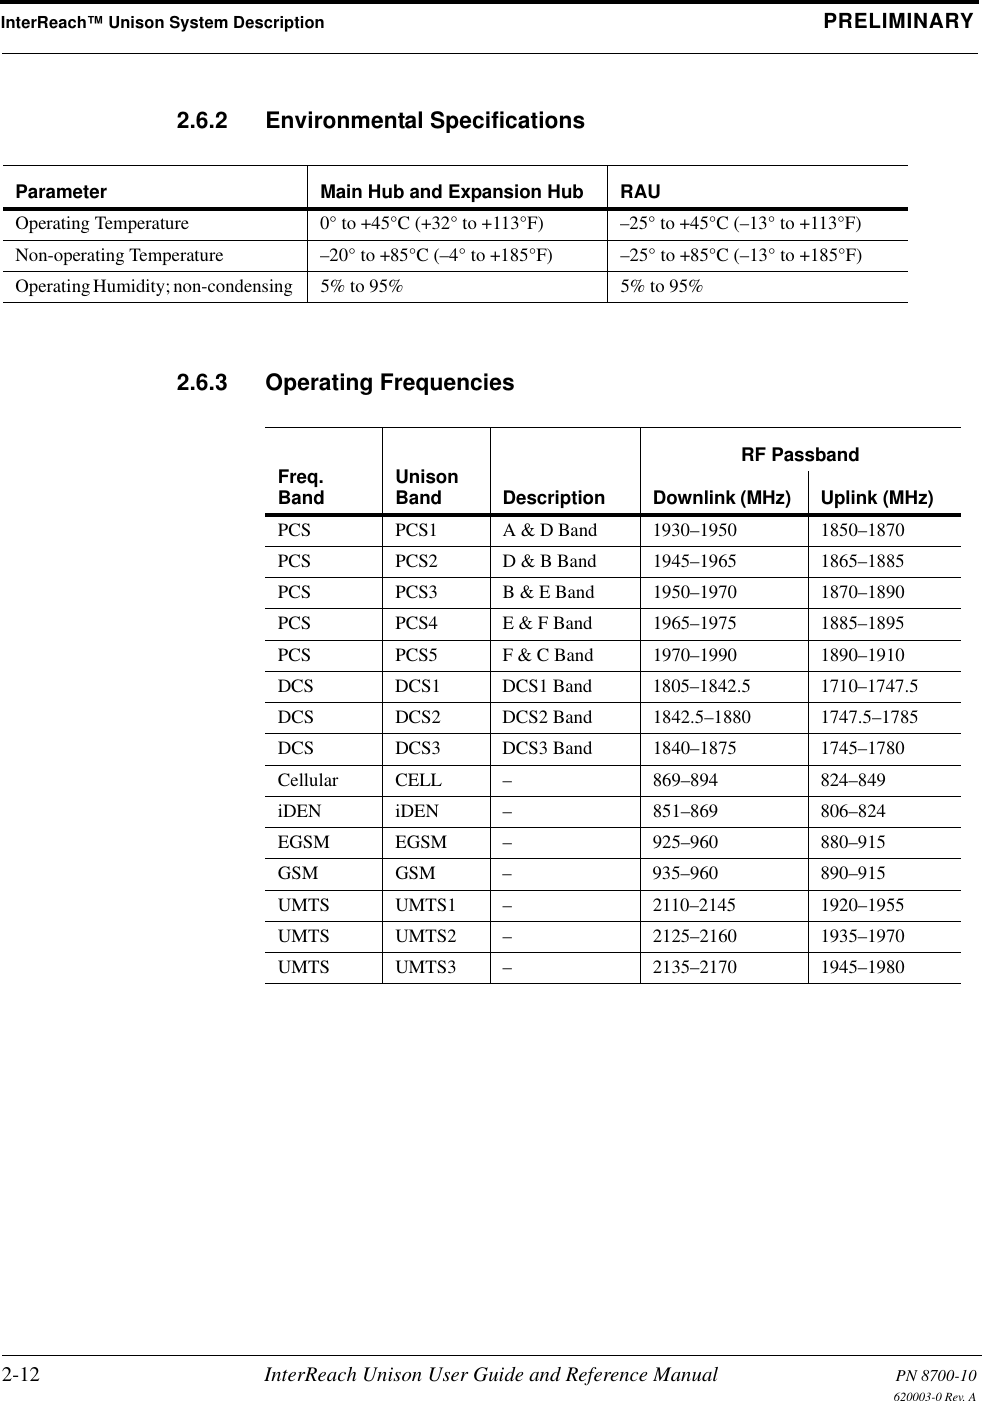 InterReach™ Unison System Description PRELIMINARY2-12 InterReach Unison User Guide and Reference Manual PN 8700-10620003-0 Rev. A2.6.2 Environmental Specifications2.6.3 Operating FrequenciesParameter Main Hub and Expansion Hub RAUOperating Temperature  0° to +45°C (+32° to +113°F) –25° to +45°C (–13° to +113°F)Non-operating Temperature  –20° to +85°C (–4° to +185°F) –25° to +85°C (–13° to +185°F)Operating Humidity; non-condensing  5% to 95% 5% to 95%Freq.Band UnisonBand DescriptionRF PassbandDownlink (MHz)  Uplink (MHz)PCS PCS1 A &amp; D Band 1930–1950 1850–1870PCS PCS2 D &amp; B Band 1945–1965 1865–1885PCS PCS3 B &amp; E Band 1950–1970 1870–1890PCS PCS4 E &amp; F Band 1965–1975 1885–1895PCS PCS5 F &amp; C Band 1970–1990 1890–1910DCS DCS1 DCS1 Band 1805–1842.5 1710–1747.5DCS DCS2 DCS2 Band 1842.5–1880 1747.5–1785DCS DCS3 DCS3 Band 1840–1875 1745–1780Cellular CELL – 869–894 824–849iDEN iDEN – 851–869 806–824EGSM EGSM – 925–960 880–915GSM GSM – 935–960 890–915UMTS UMTS1 – 2110–2145 1920–1955UMTS UMTS2 – 2125–2160 1935–1970UMTS UMTS3 – 2135–2170 1945–1980